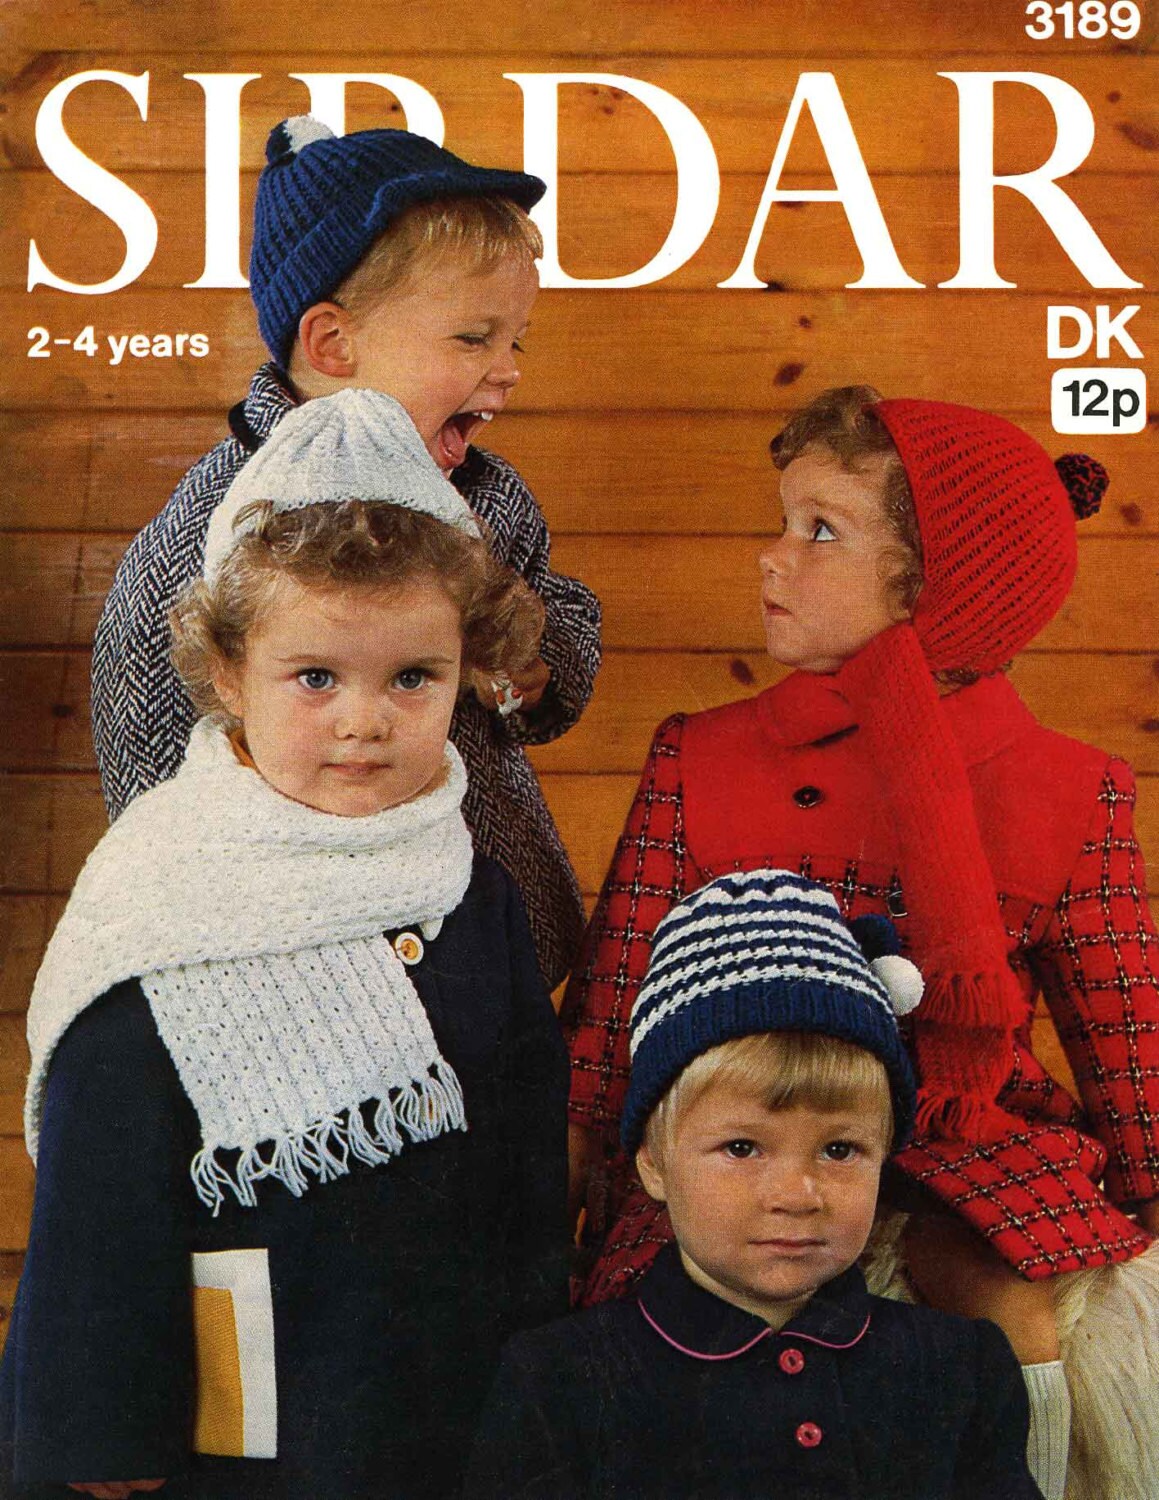 Children's Cap, Hat and Scarf, 2-4 years, DK, 80s Knitting Pattern, Sirdar 3189